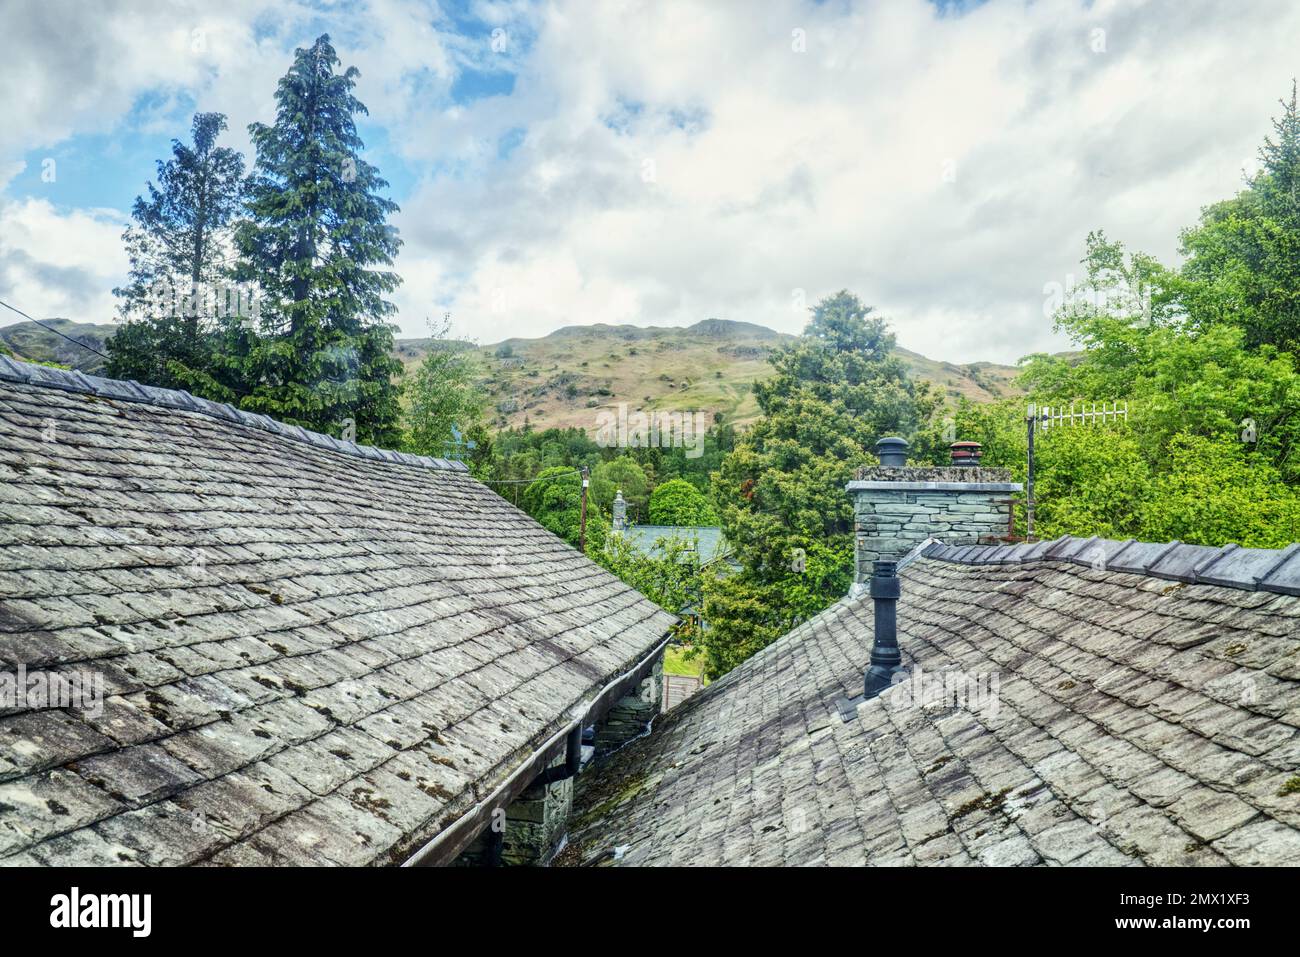 Elterwater, English Lake District, Cumbria, England, UK - Looking across slate tiles and chimneys of holiday cottage roofs towards the hills Stock Photo